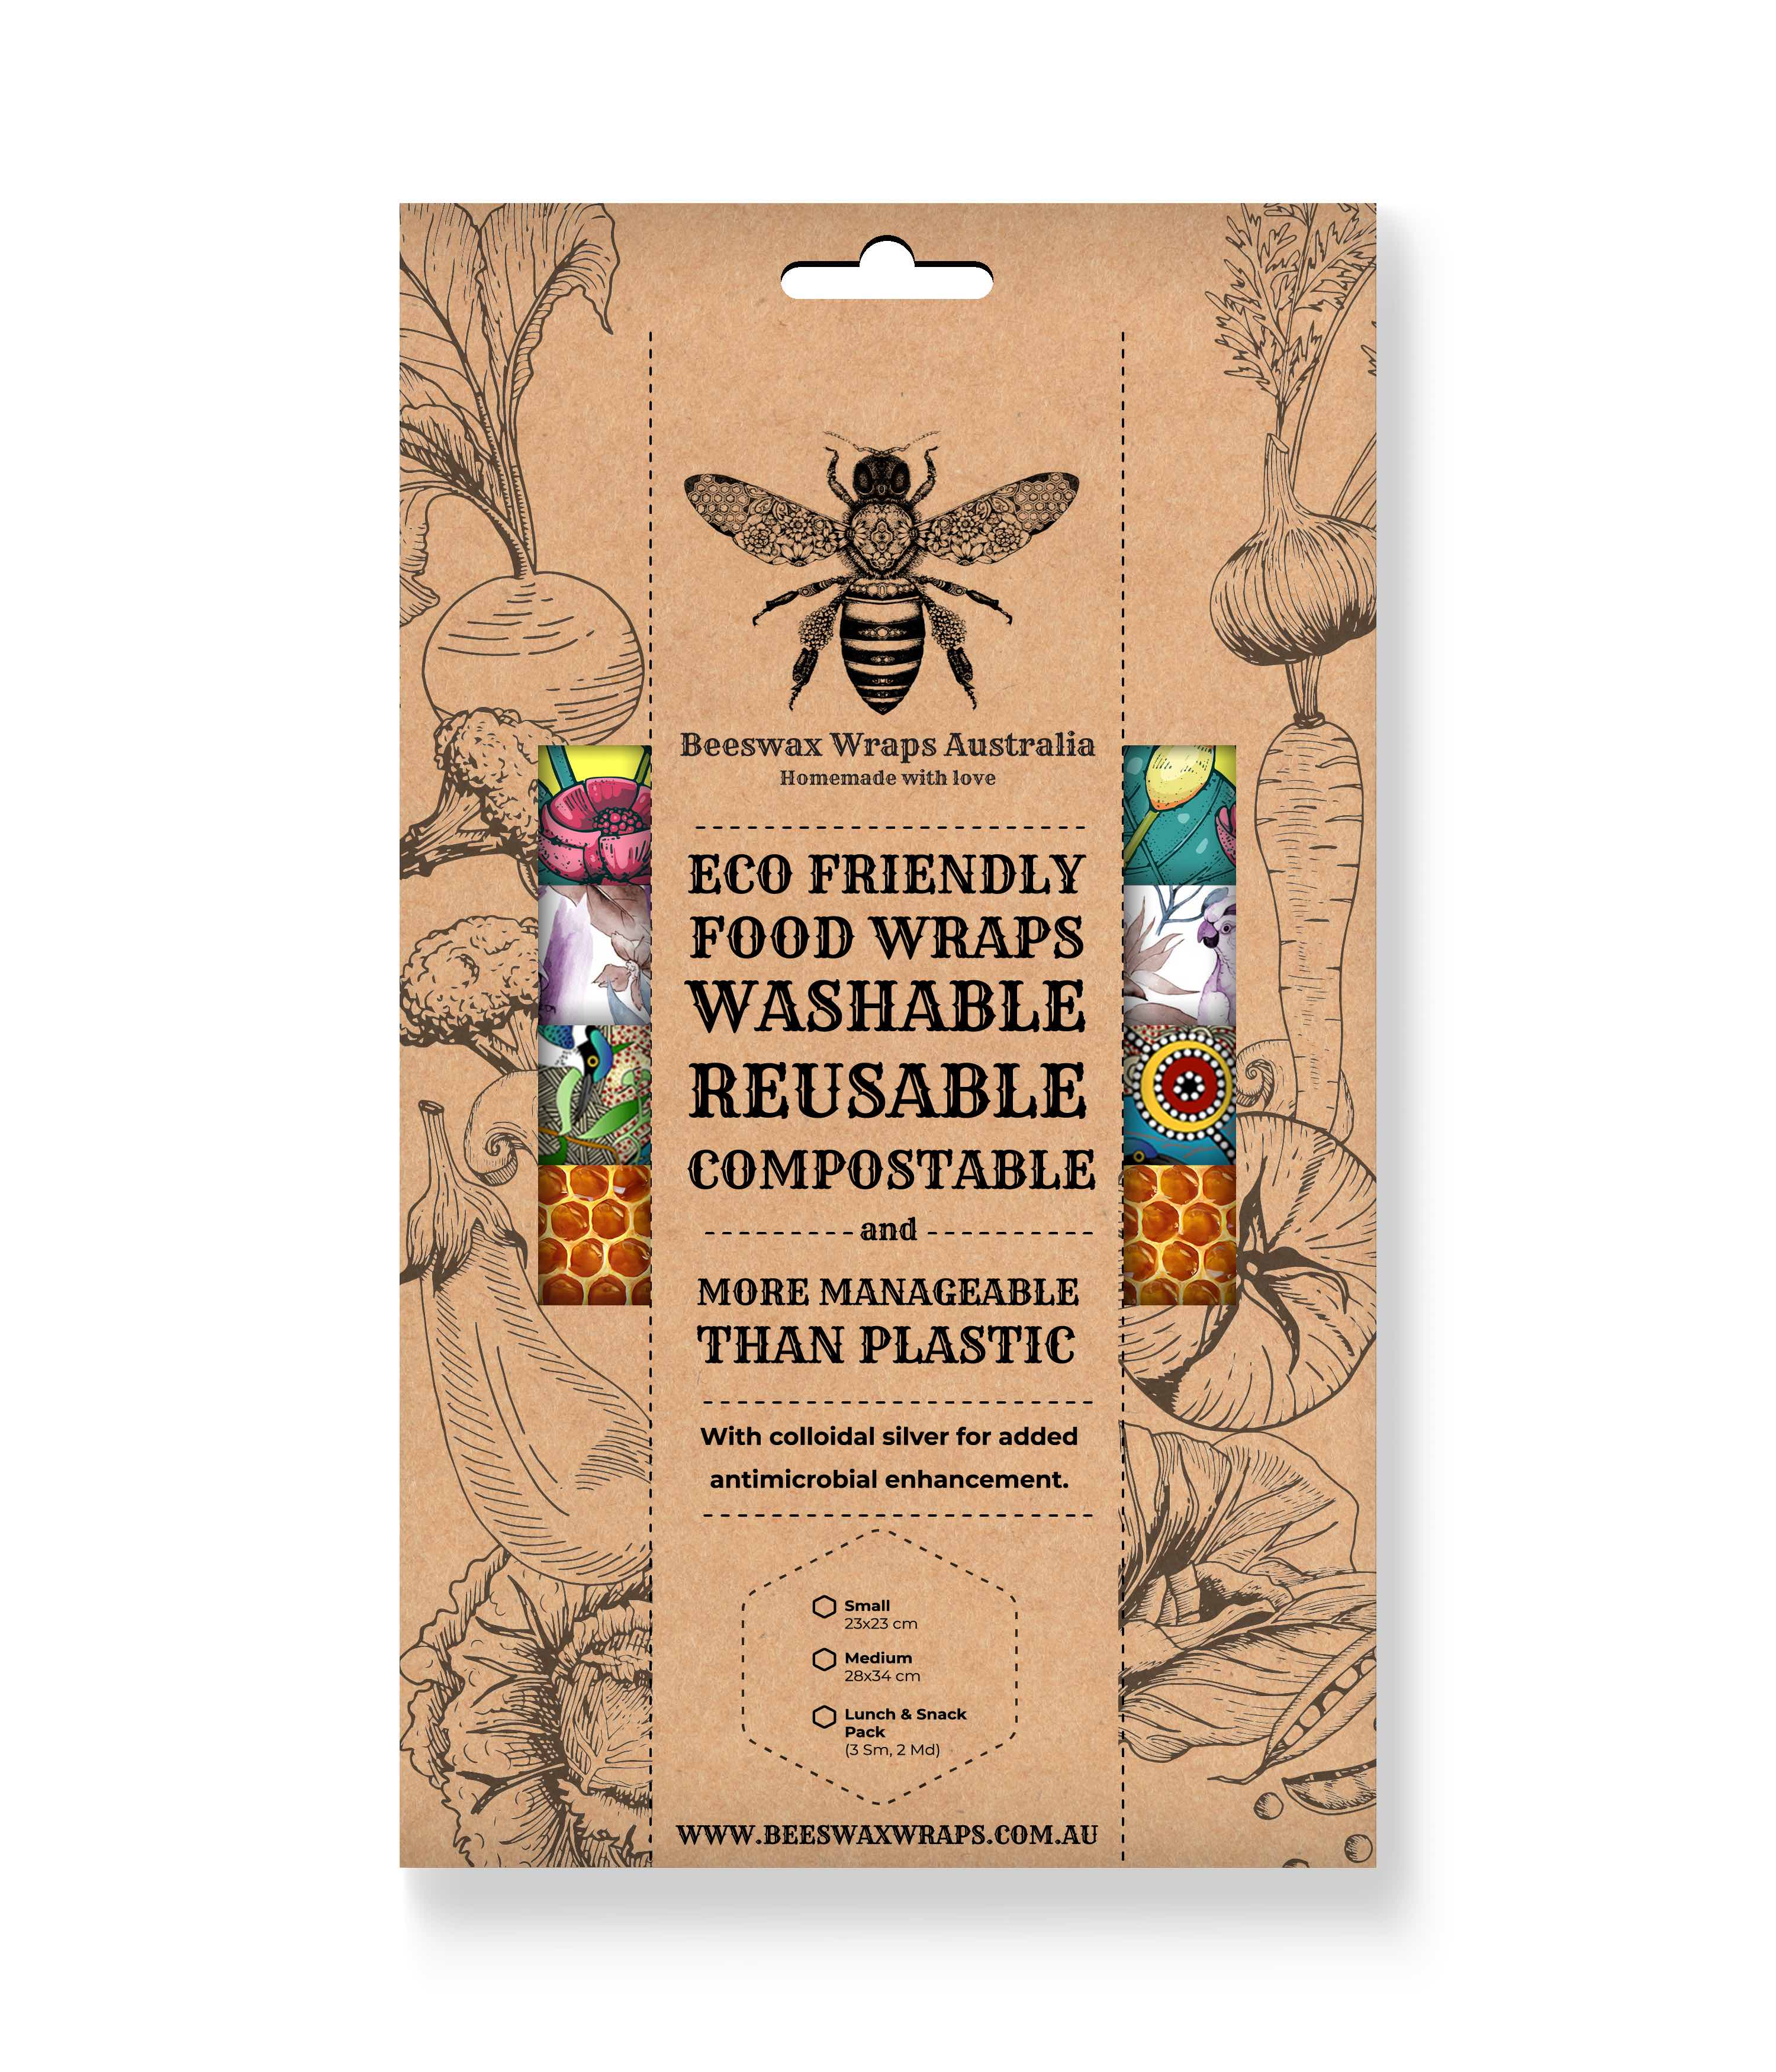 Whole Store Beeswax Wraps